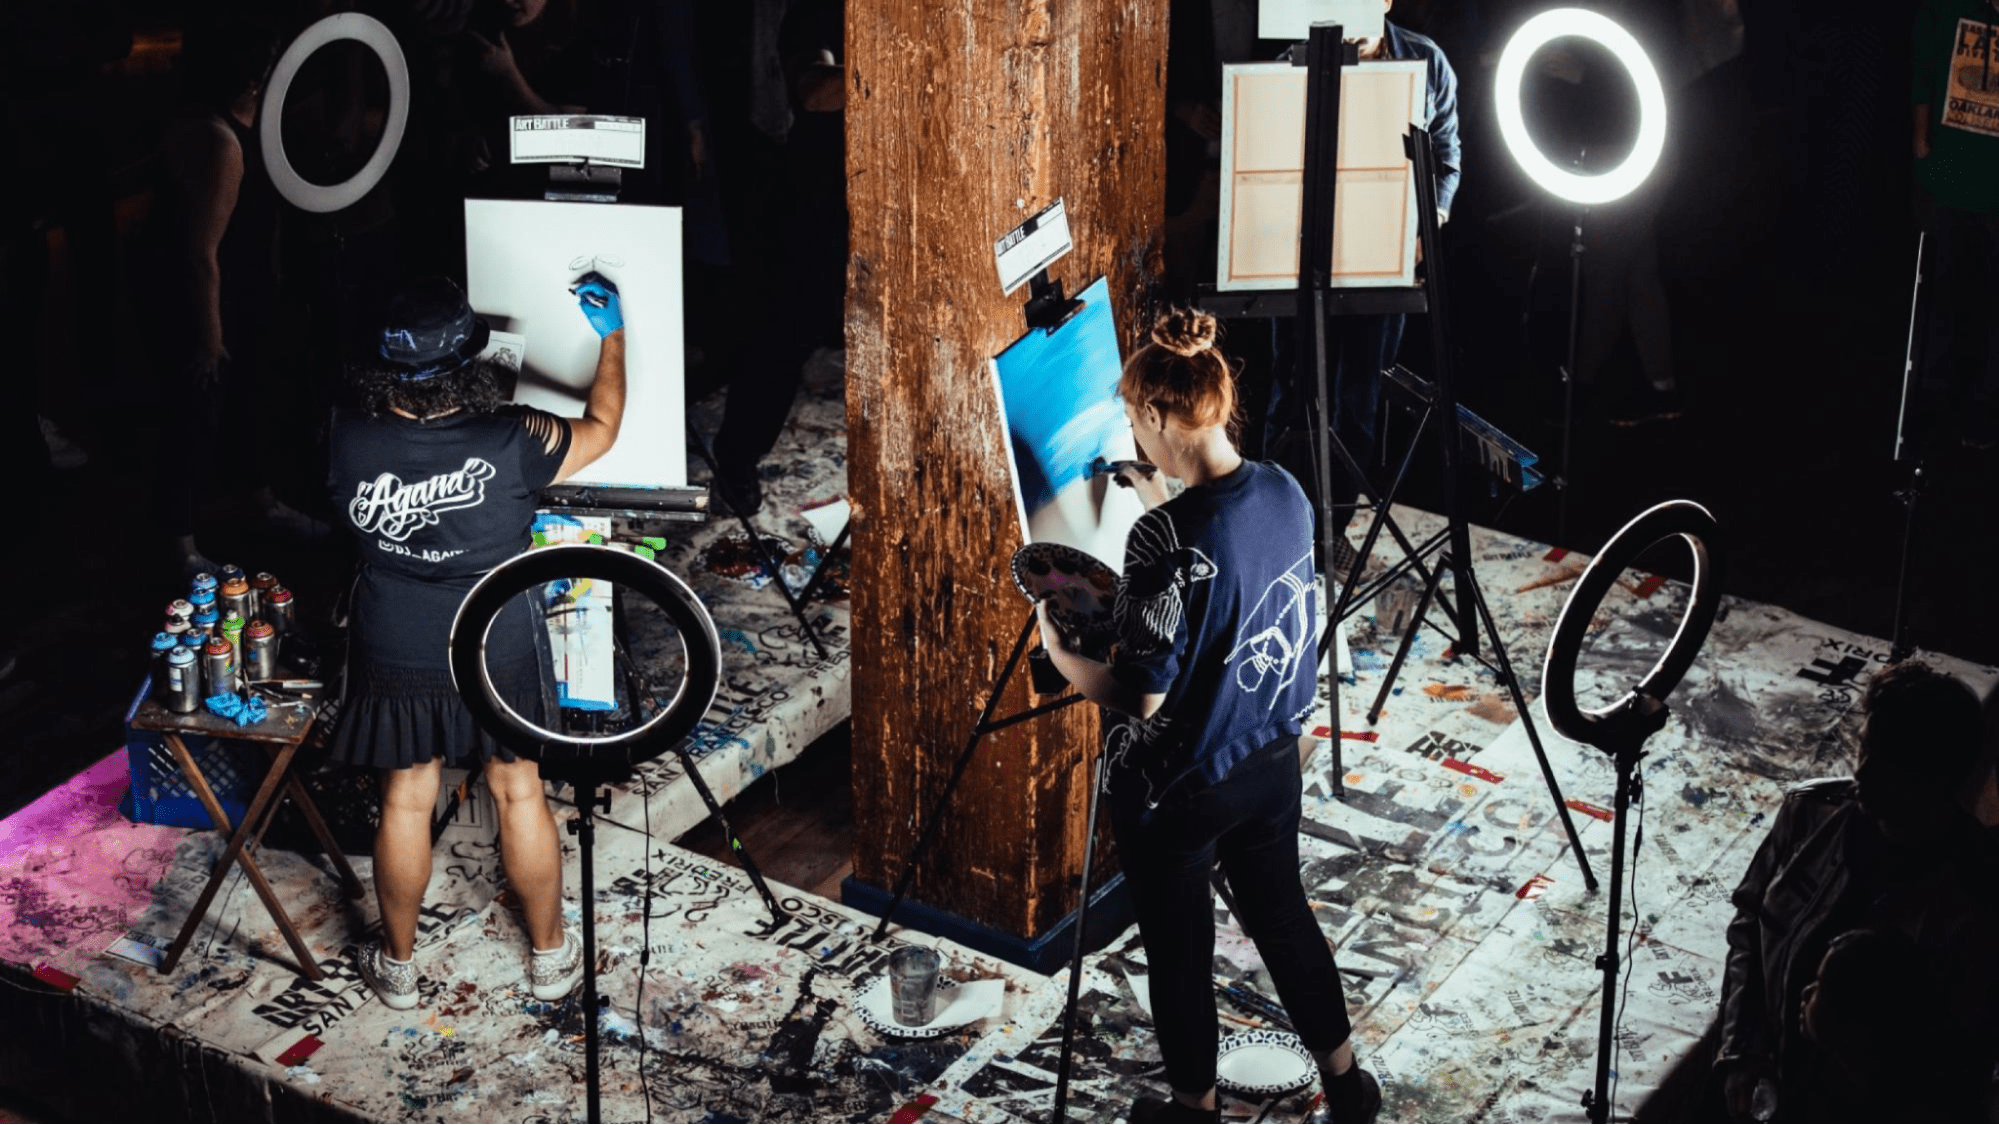 People painting with a high-quality lighting setup